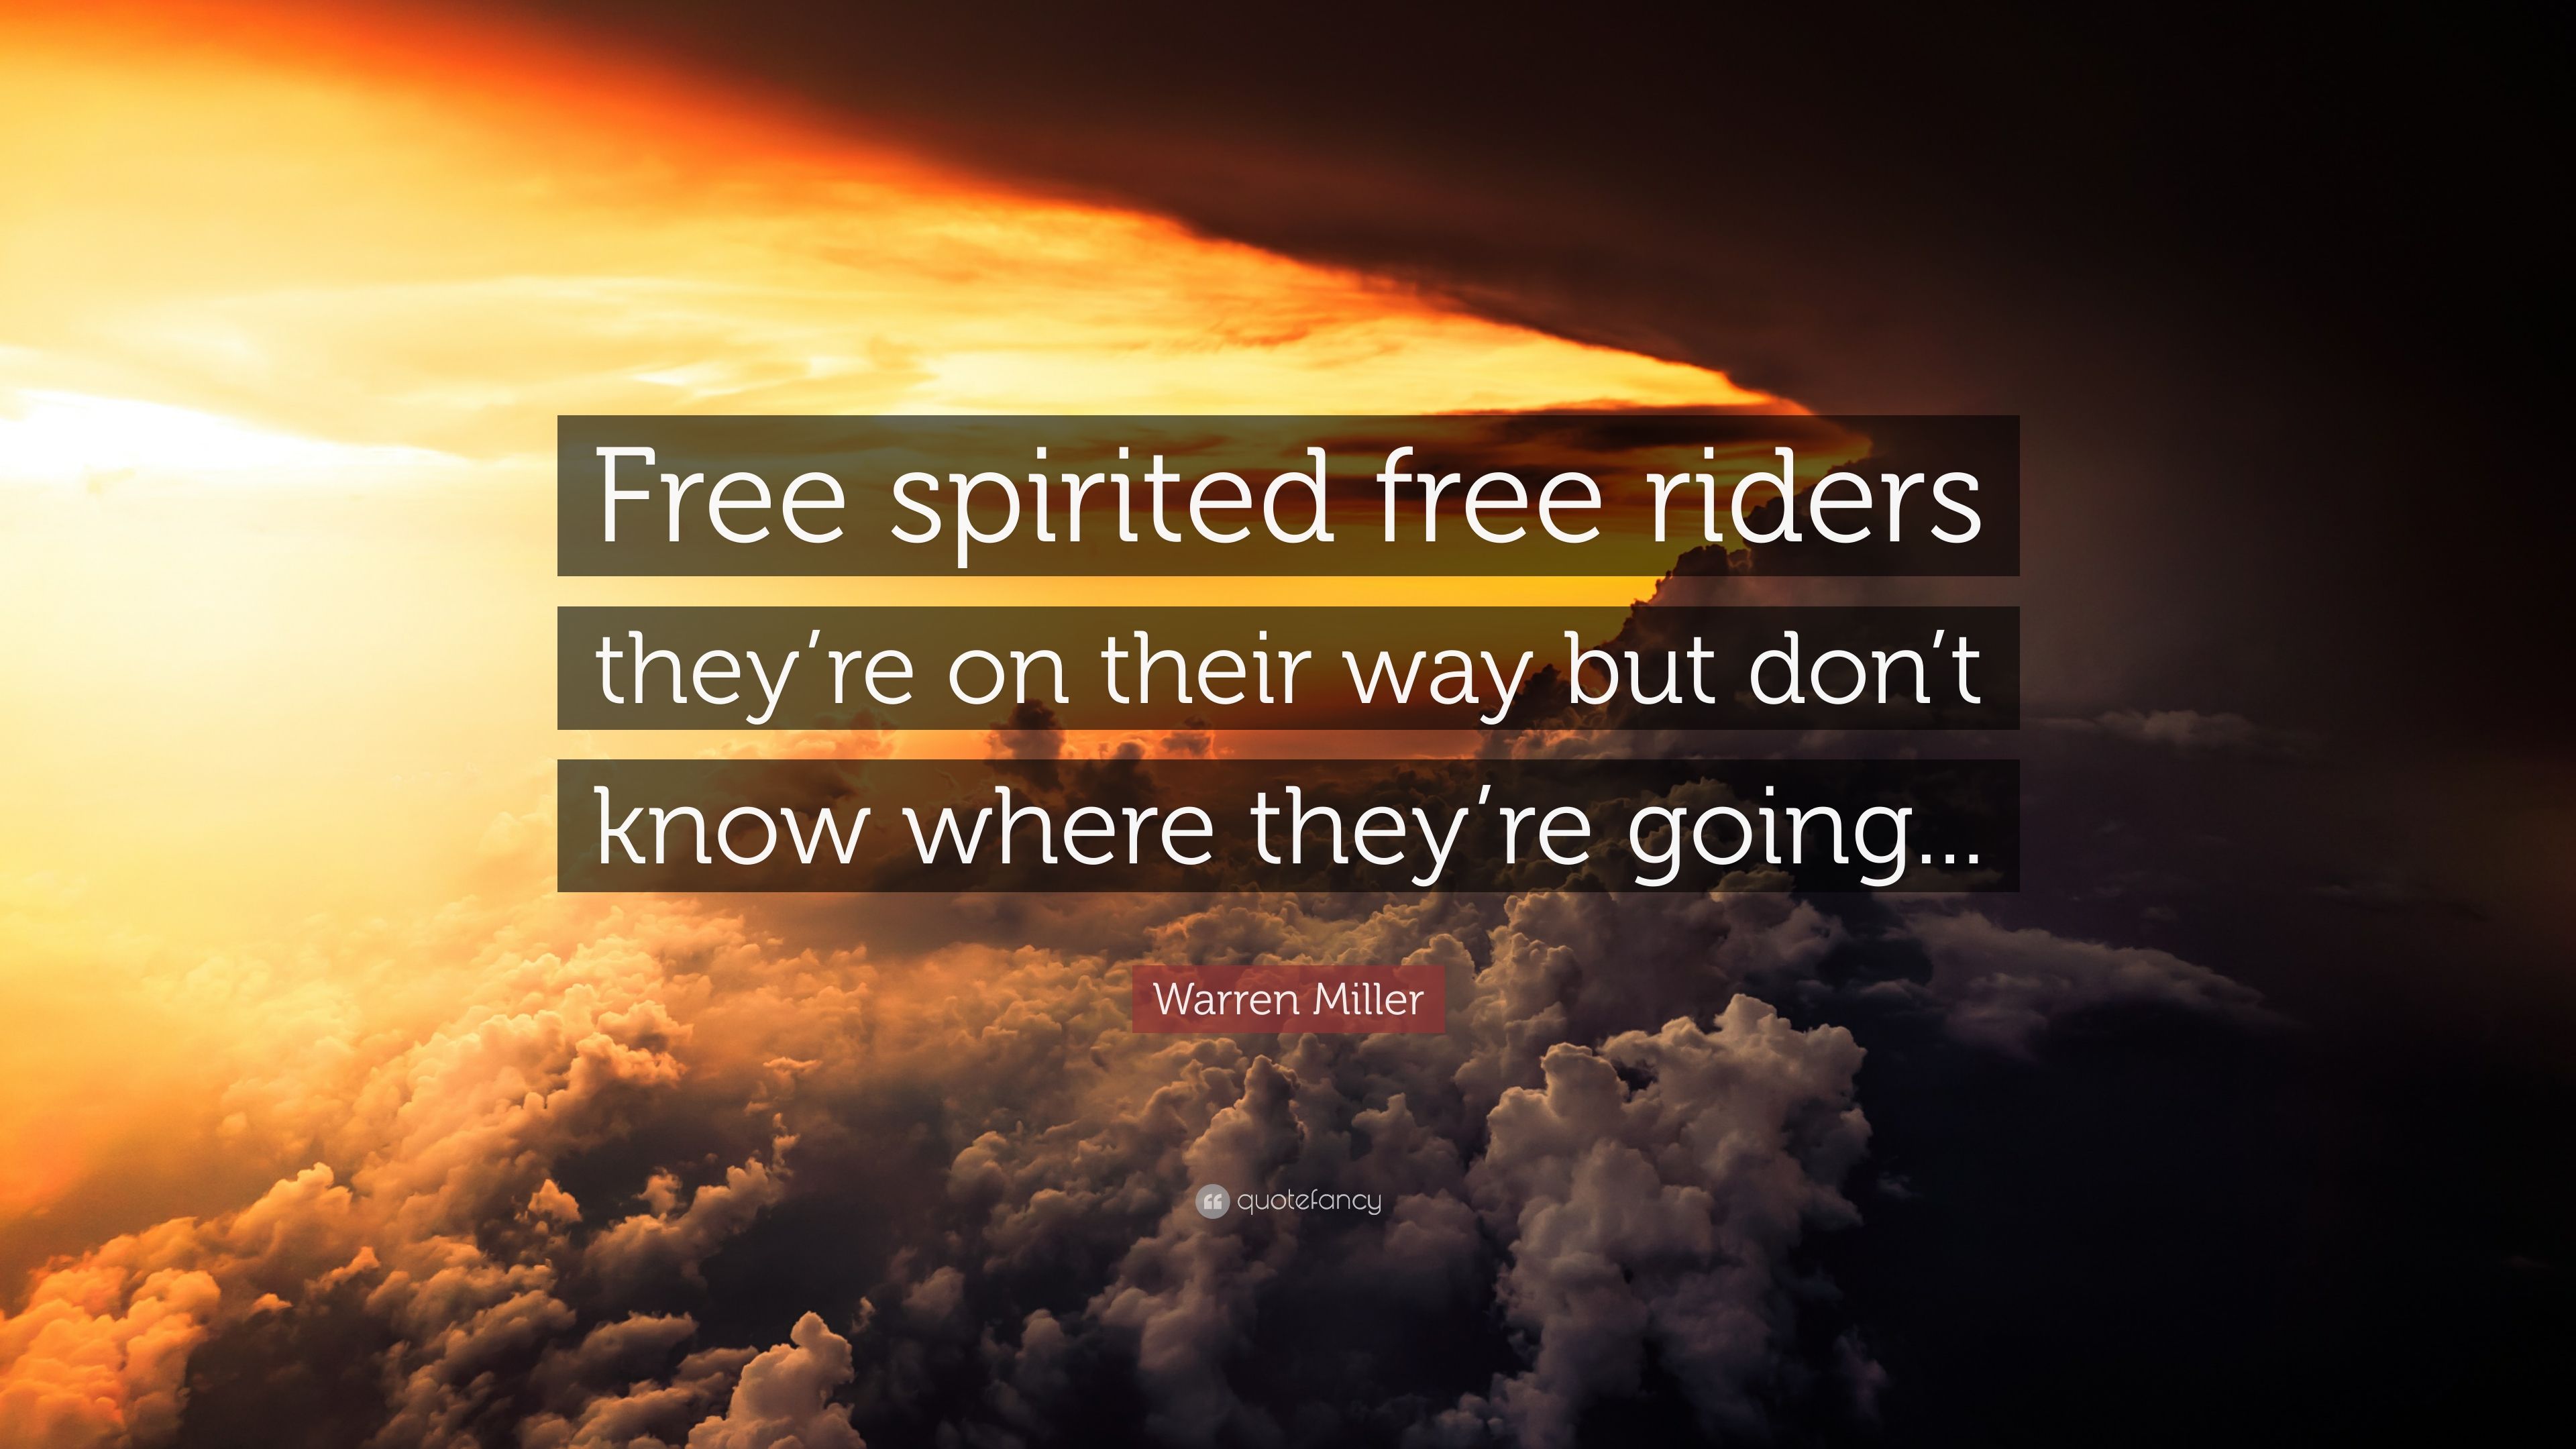 Warren Miller Quote: “Free spirited free riders they're on their way but don't know where they're going.” (10 wallpaper)